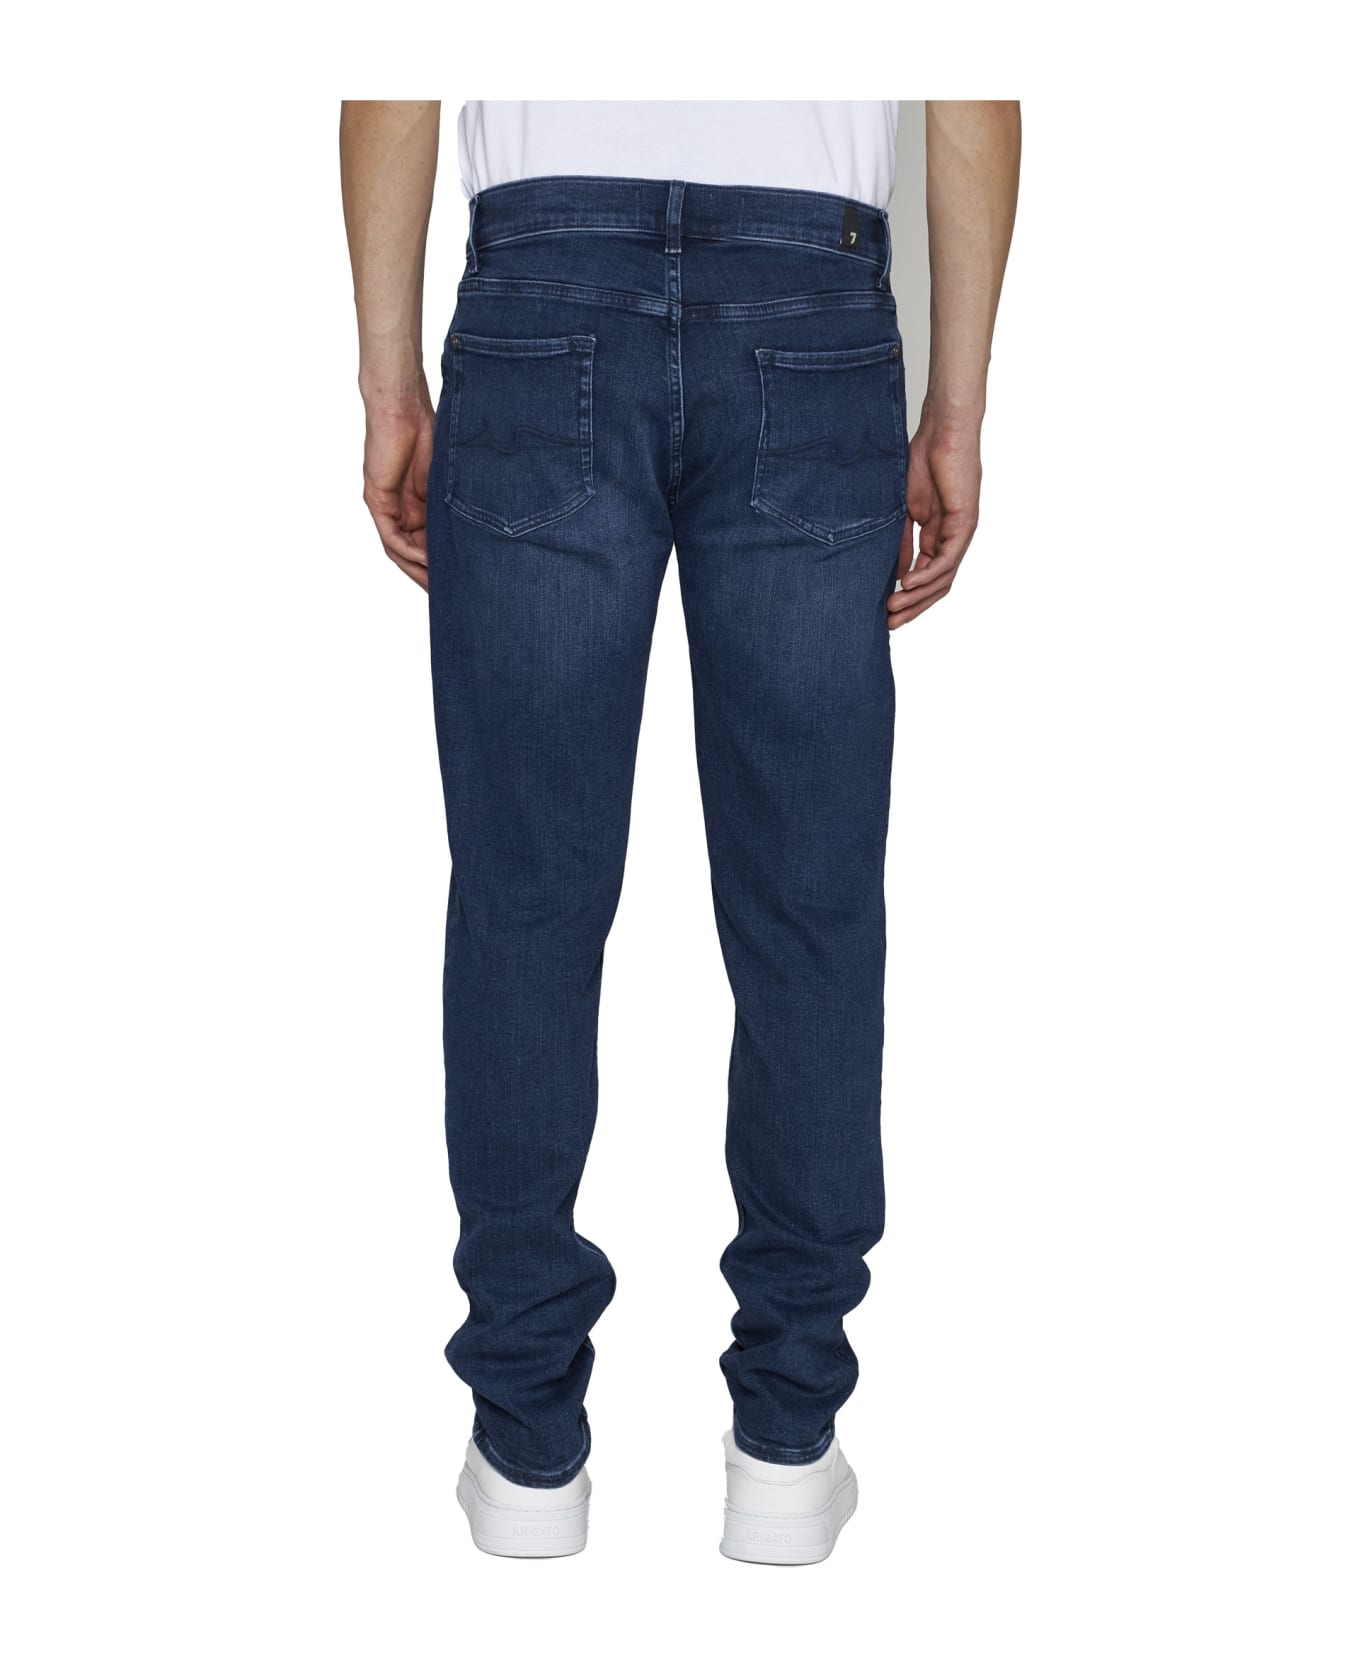 7 For All Mankind Jeans - Dark blue デニム